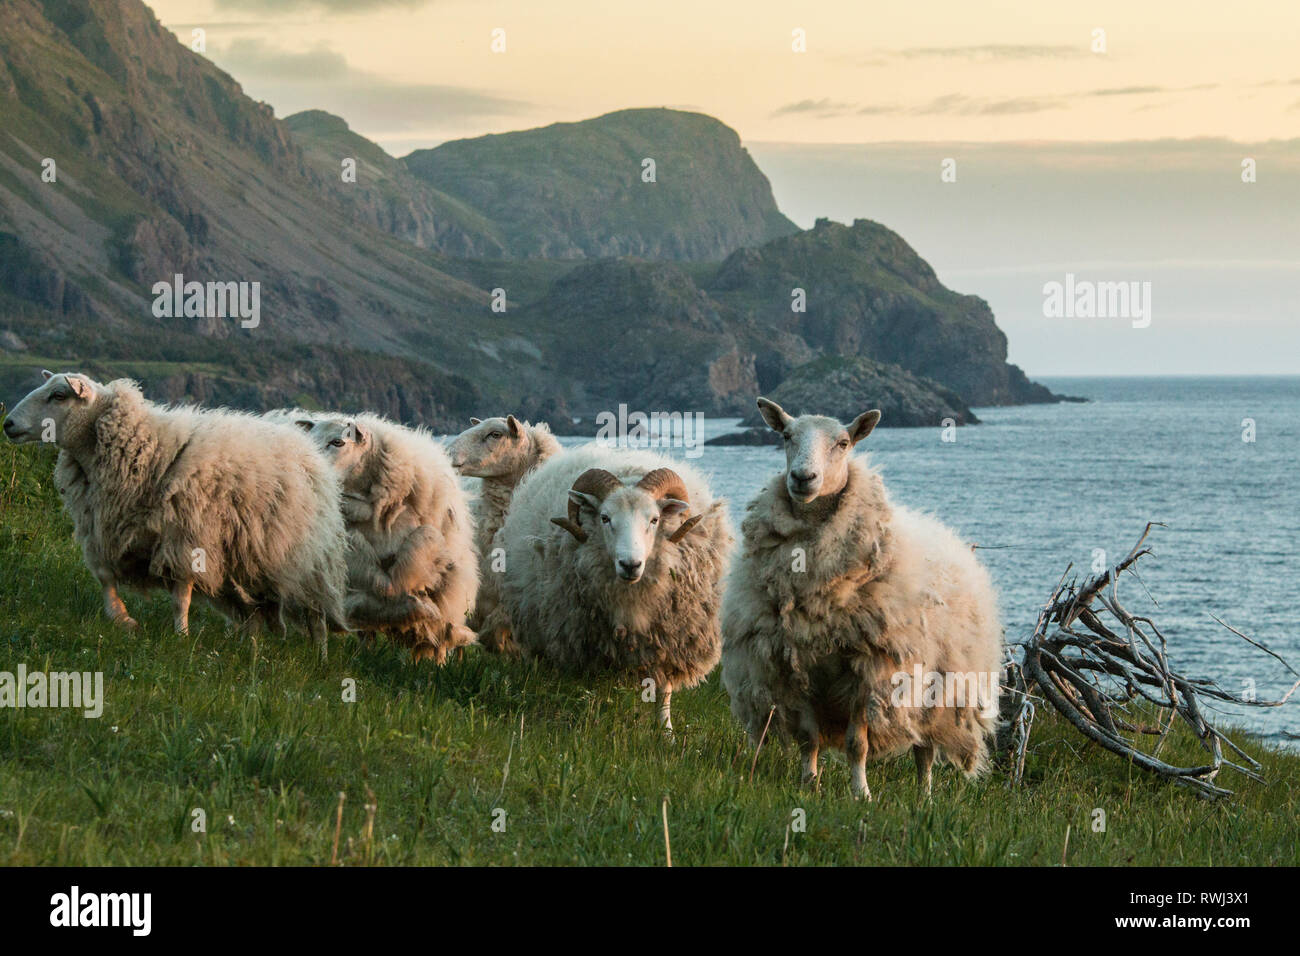 (Ovis aries) Sheep, caught in the evening glow of the sunset, eastern Pont trail, Trout River, Gros Morne National Park, Newfoundland and Labrador Stock Photo